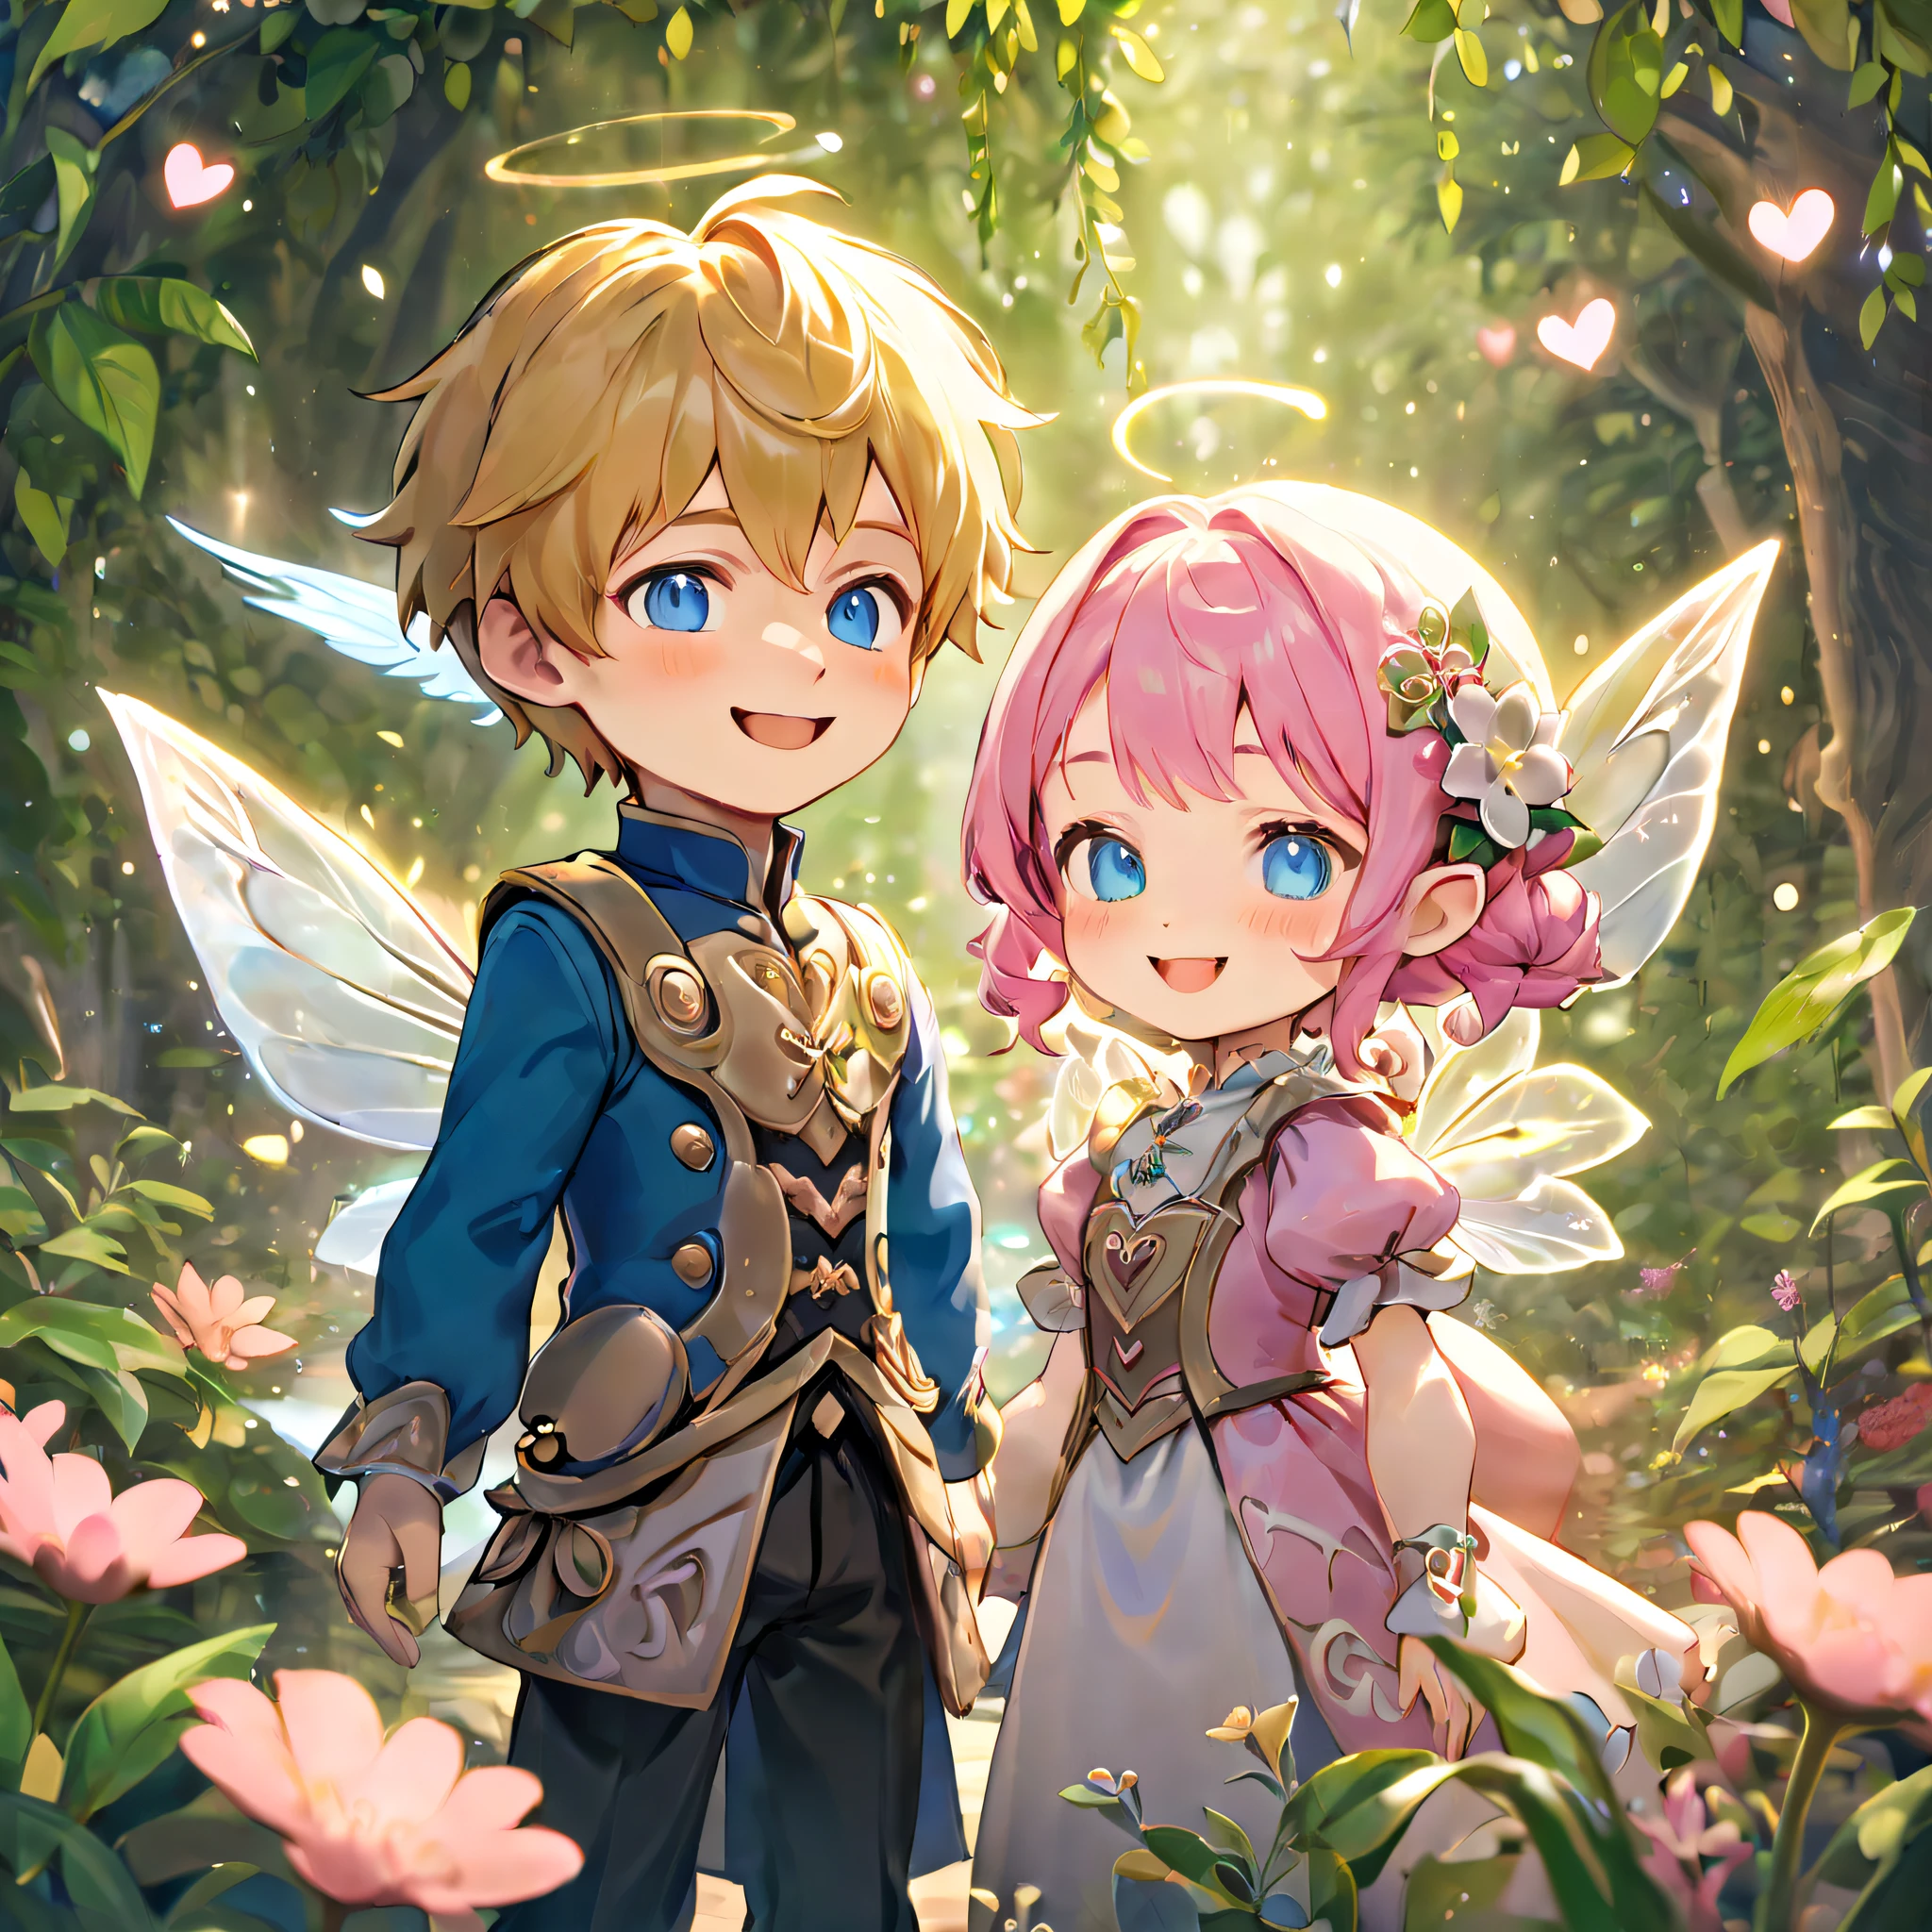 Lalafell boy has golden hair, blue eyes, and wears elegant noble clothing. The Lalafell girl has pink hair, blue eyes, and dons a matching noble outfit. Both are Smiling and adorned with delicate, ethereal fairy wings, Mid-shot,Camera Angle: Eye-Level, Background: The lush gardens of the Brimming Heart in Gridania, filled with vibrant flowers and magical lights, best quality, masterpiece, ultra-detailed, 8k, depth of field, cinematic composition, light Soft, natural lighting with a touch of fantasy glow